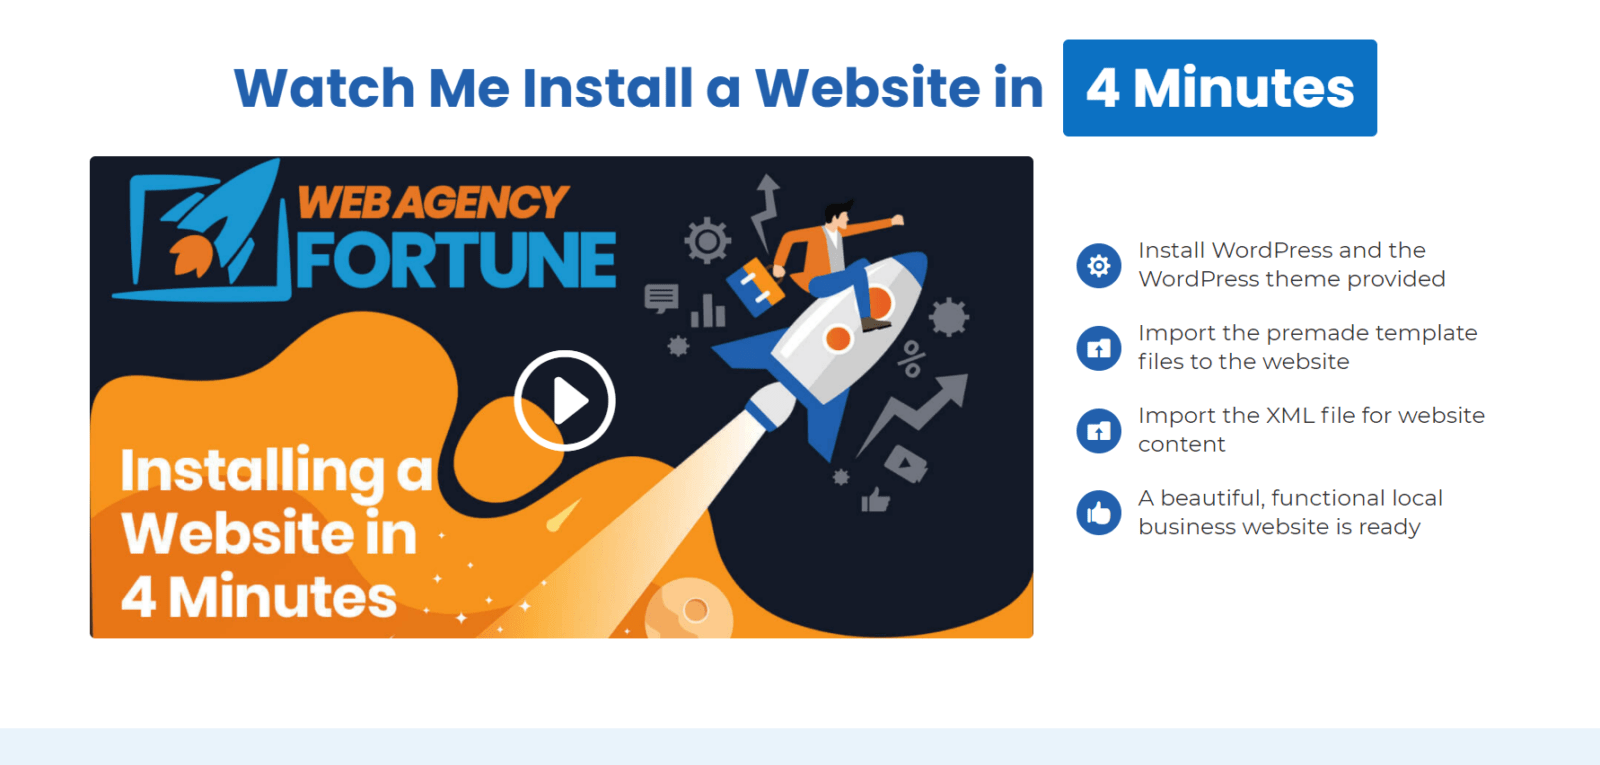 Web Agency Fortune Launch Special Web Agency Fortune 2 What is Web Agency Fortune: Start your Own Website Agency In Minutes From Now and Profit From Rabid Buyers like Doctors, Attorneys, Restaurants, Contractors and Many Other Niches! #DIGITALMARKETER #MAKEMONEYONLINE